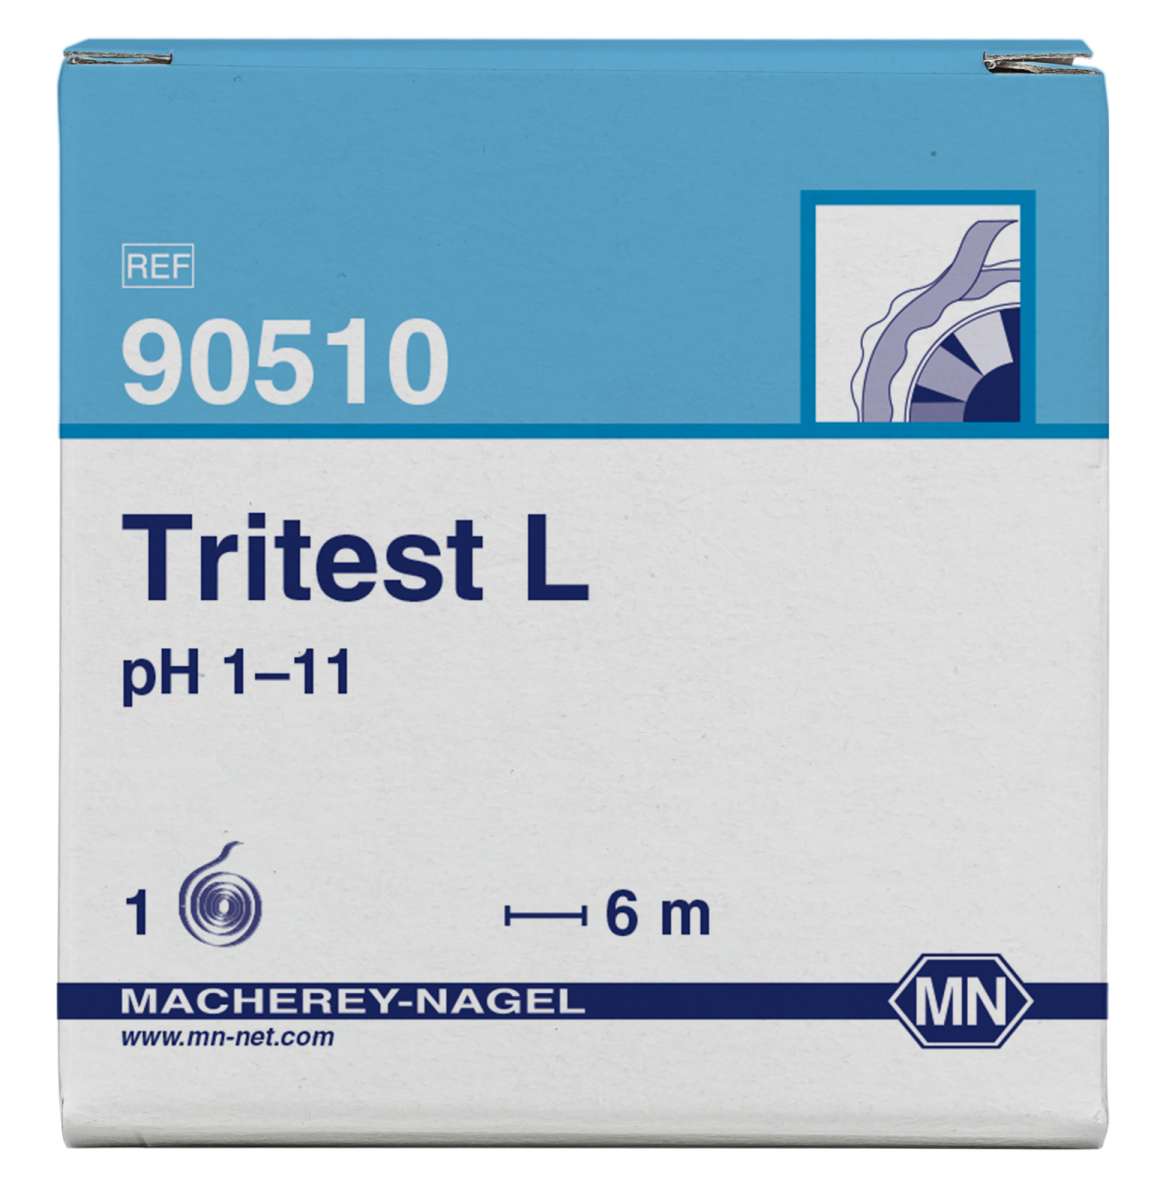 pH test paper Tritest L pH 1-11, 3 indicator zones and hydrophobic barriers (Reel of 5m length and 14mm width)